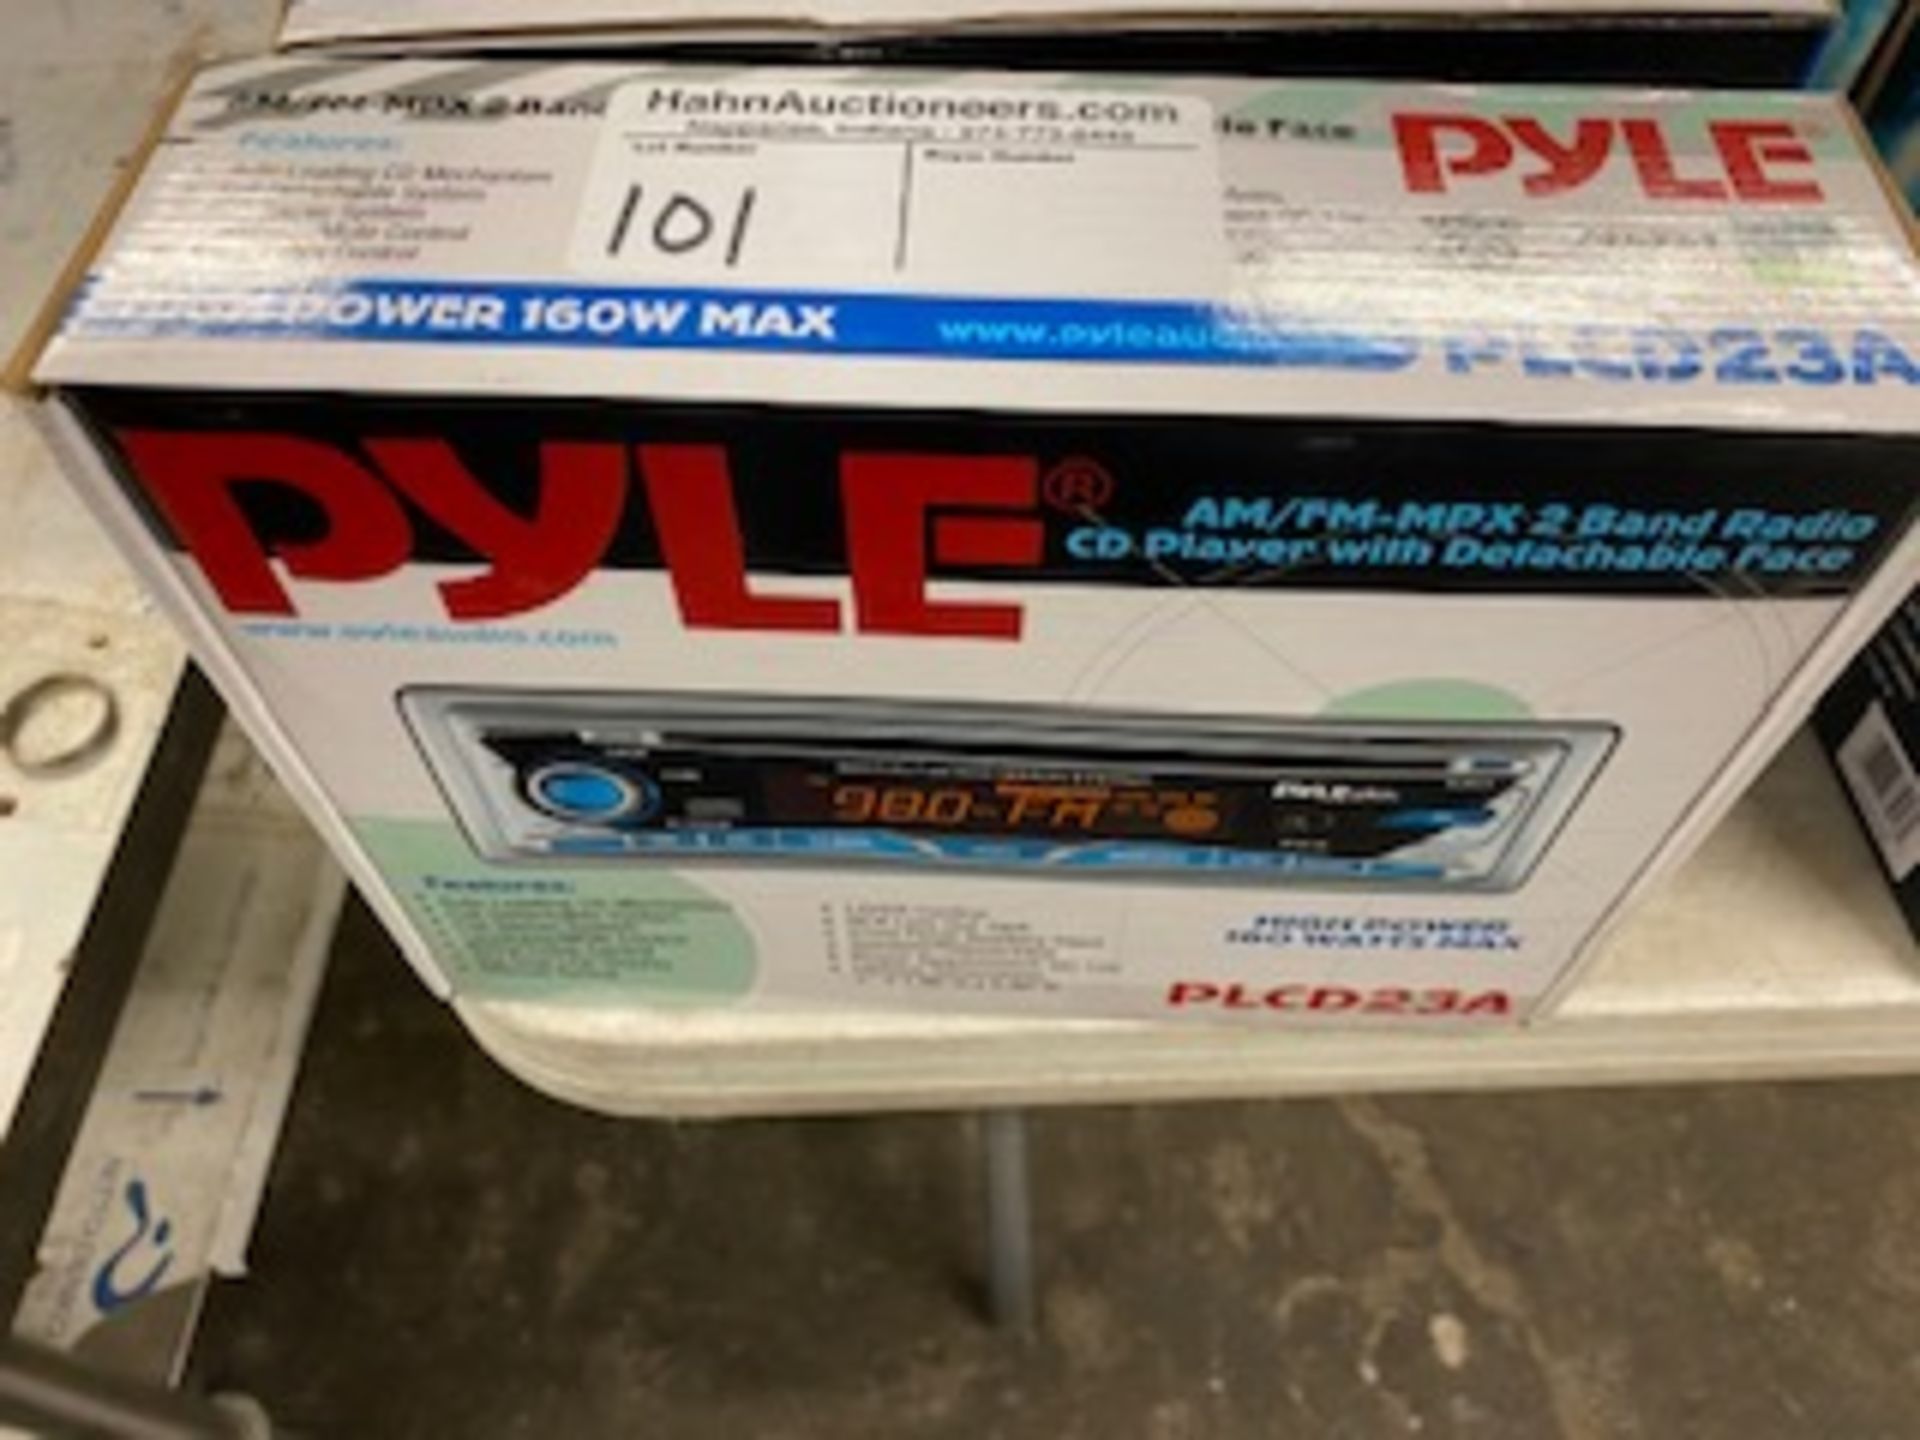 New Pyle CD player